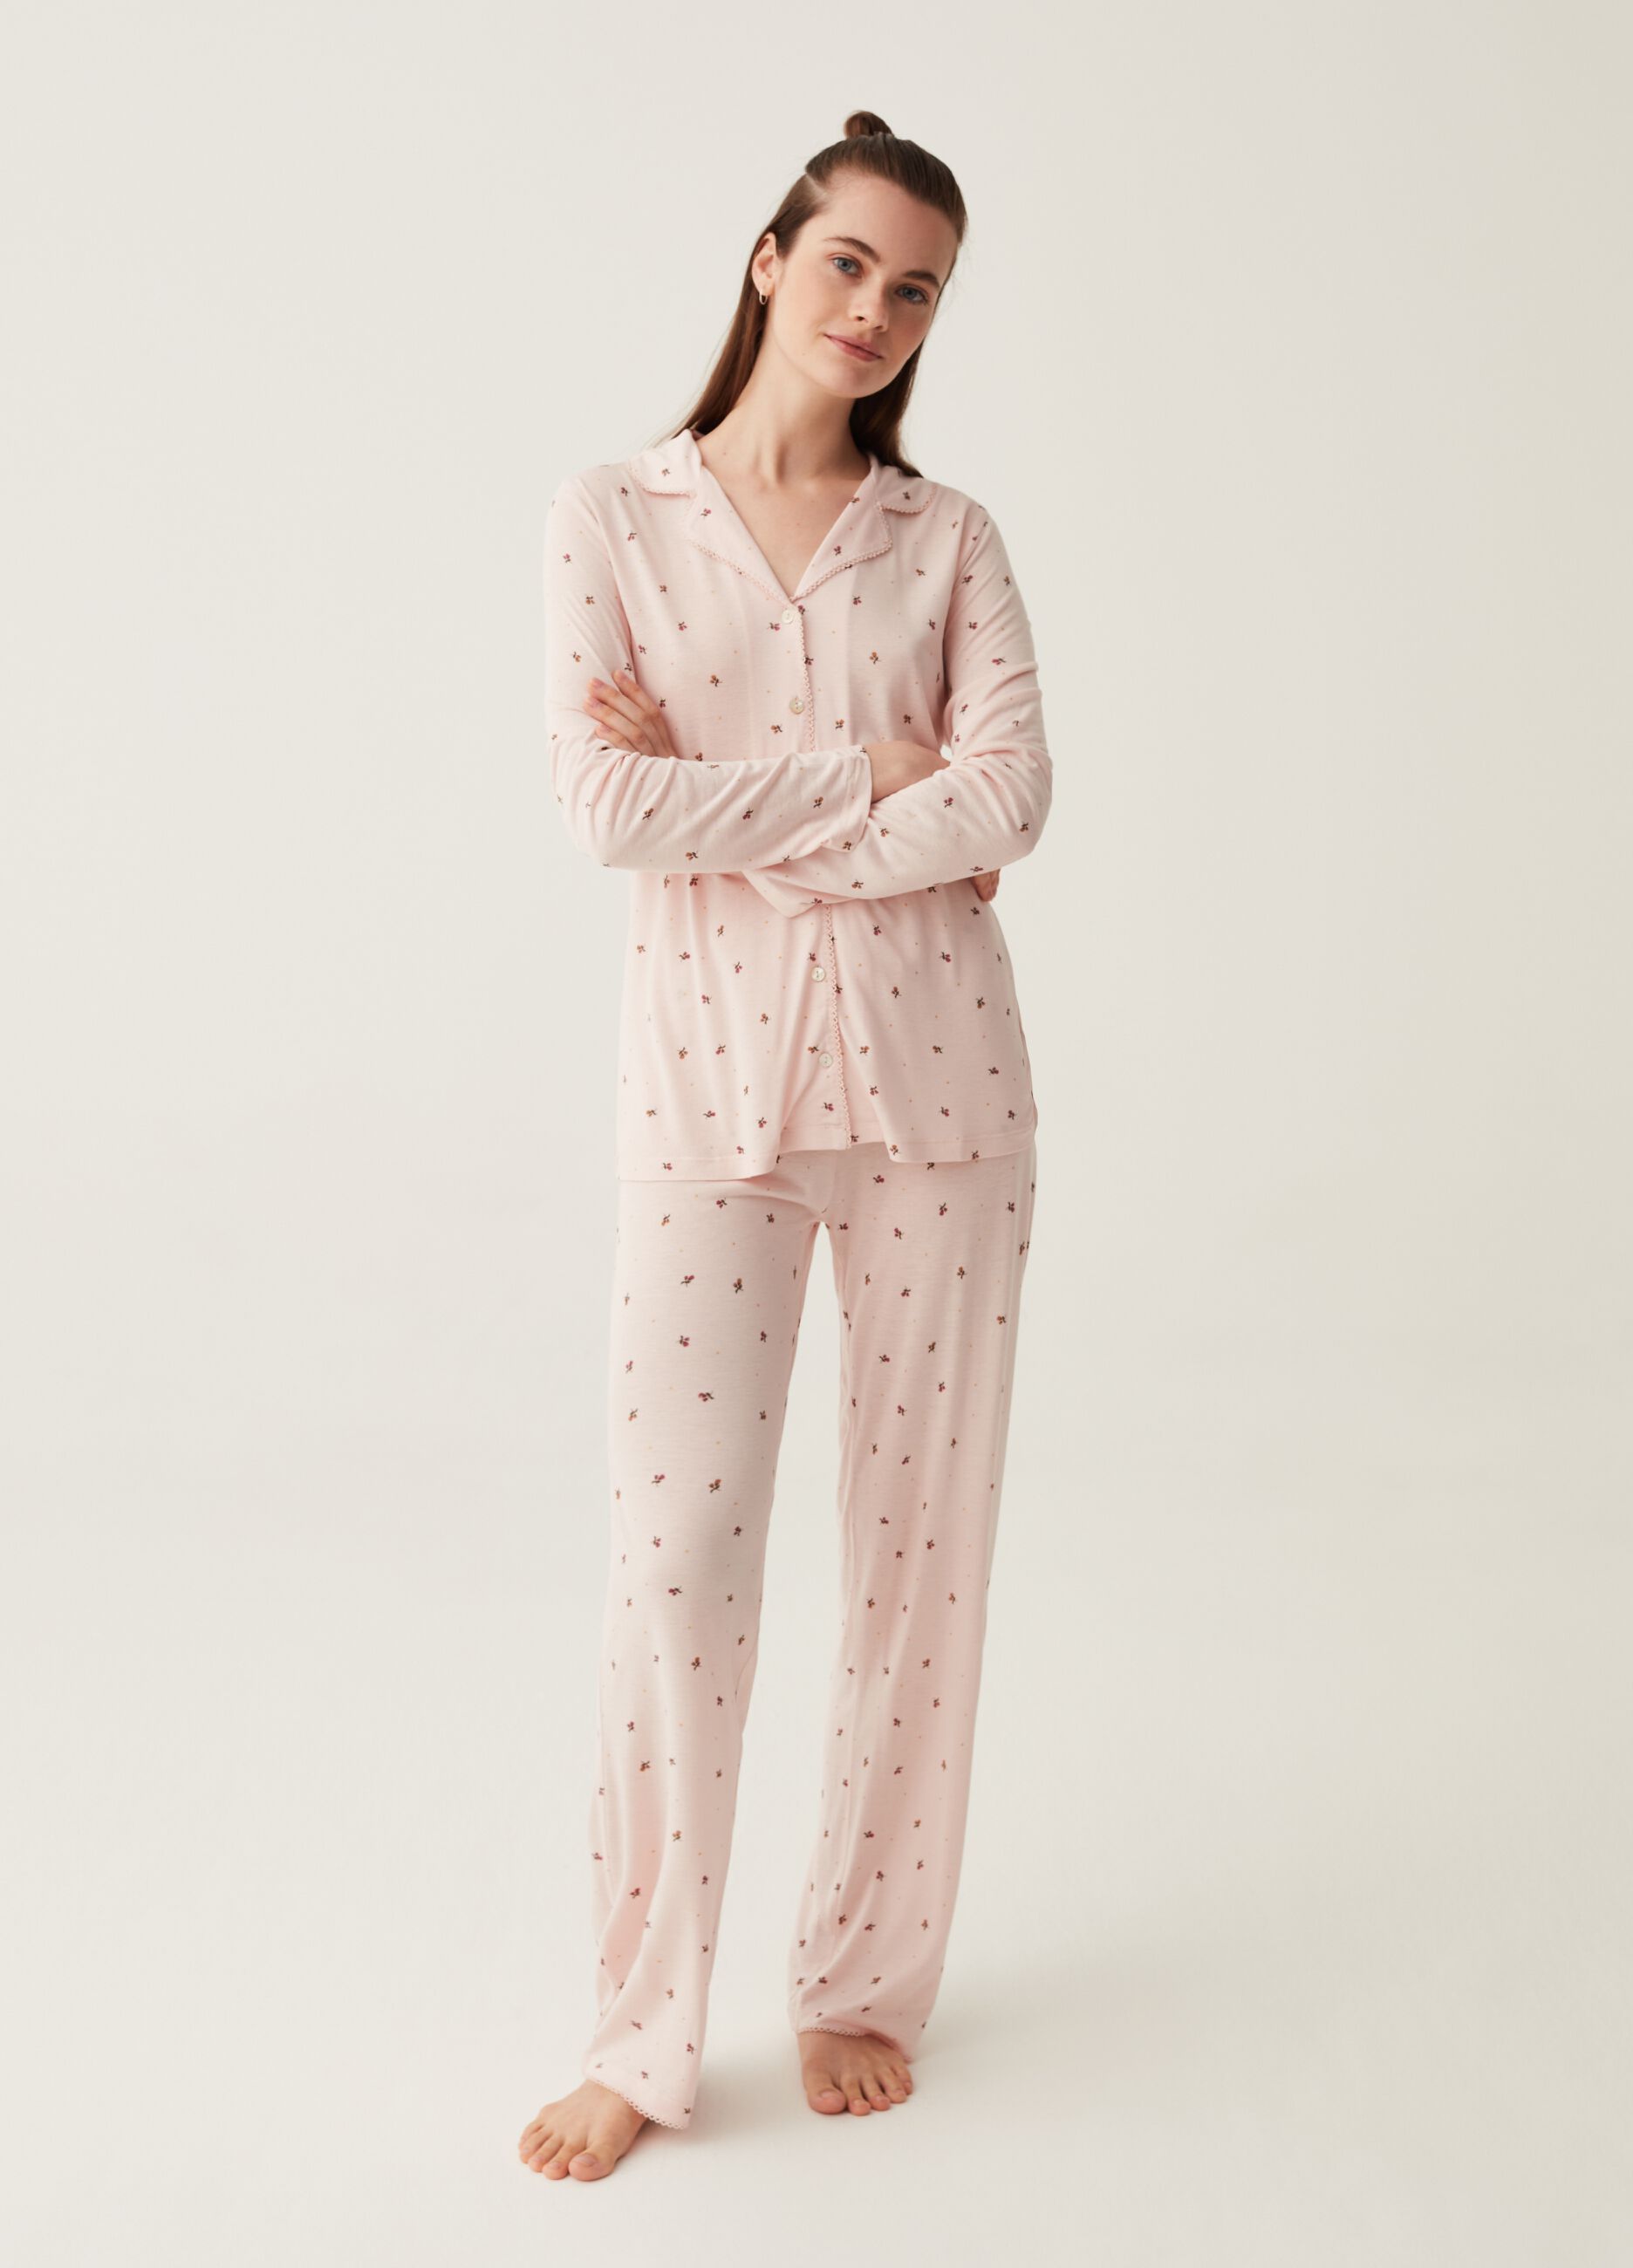 Pyjamas with polka dot and small flowers pattern_0